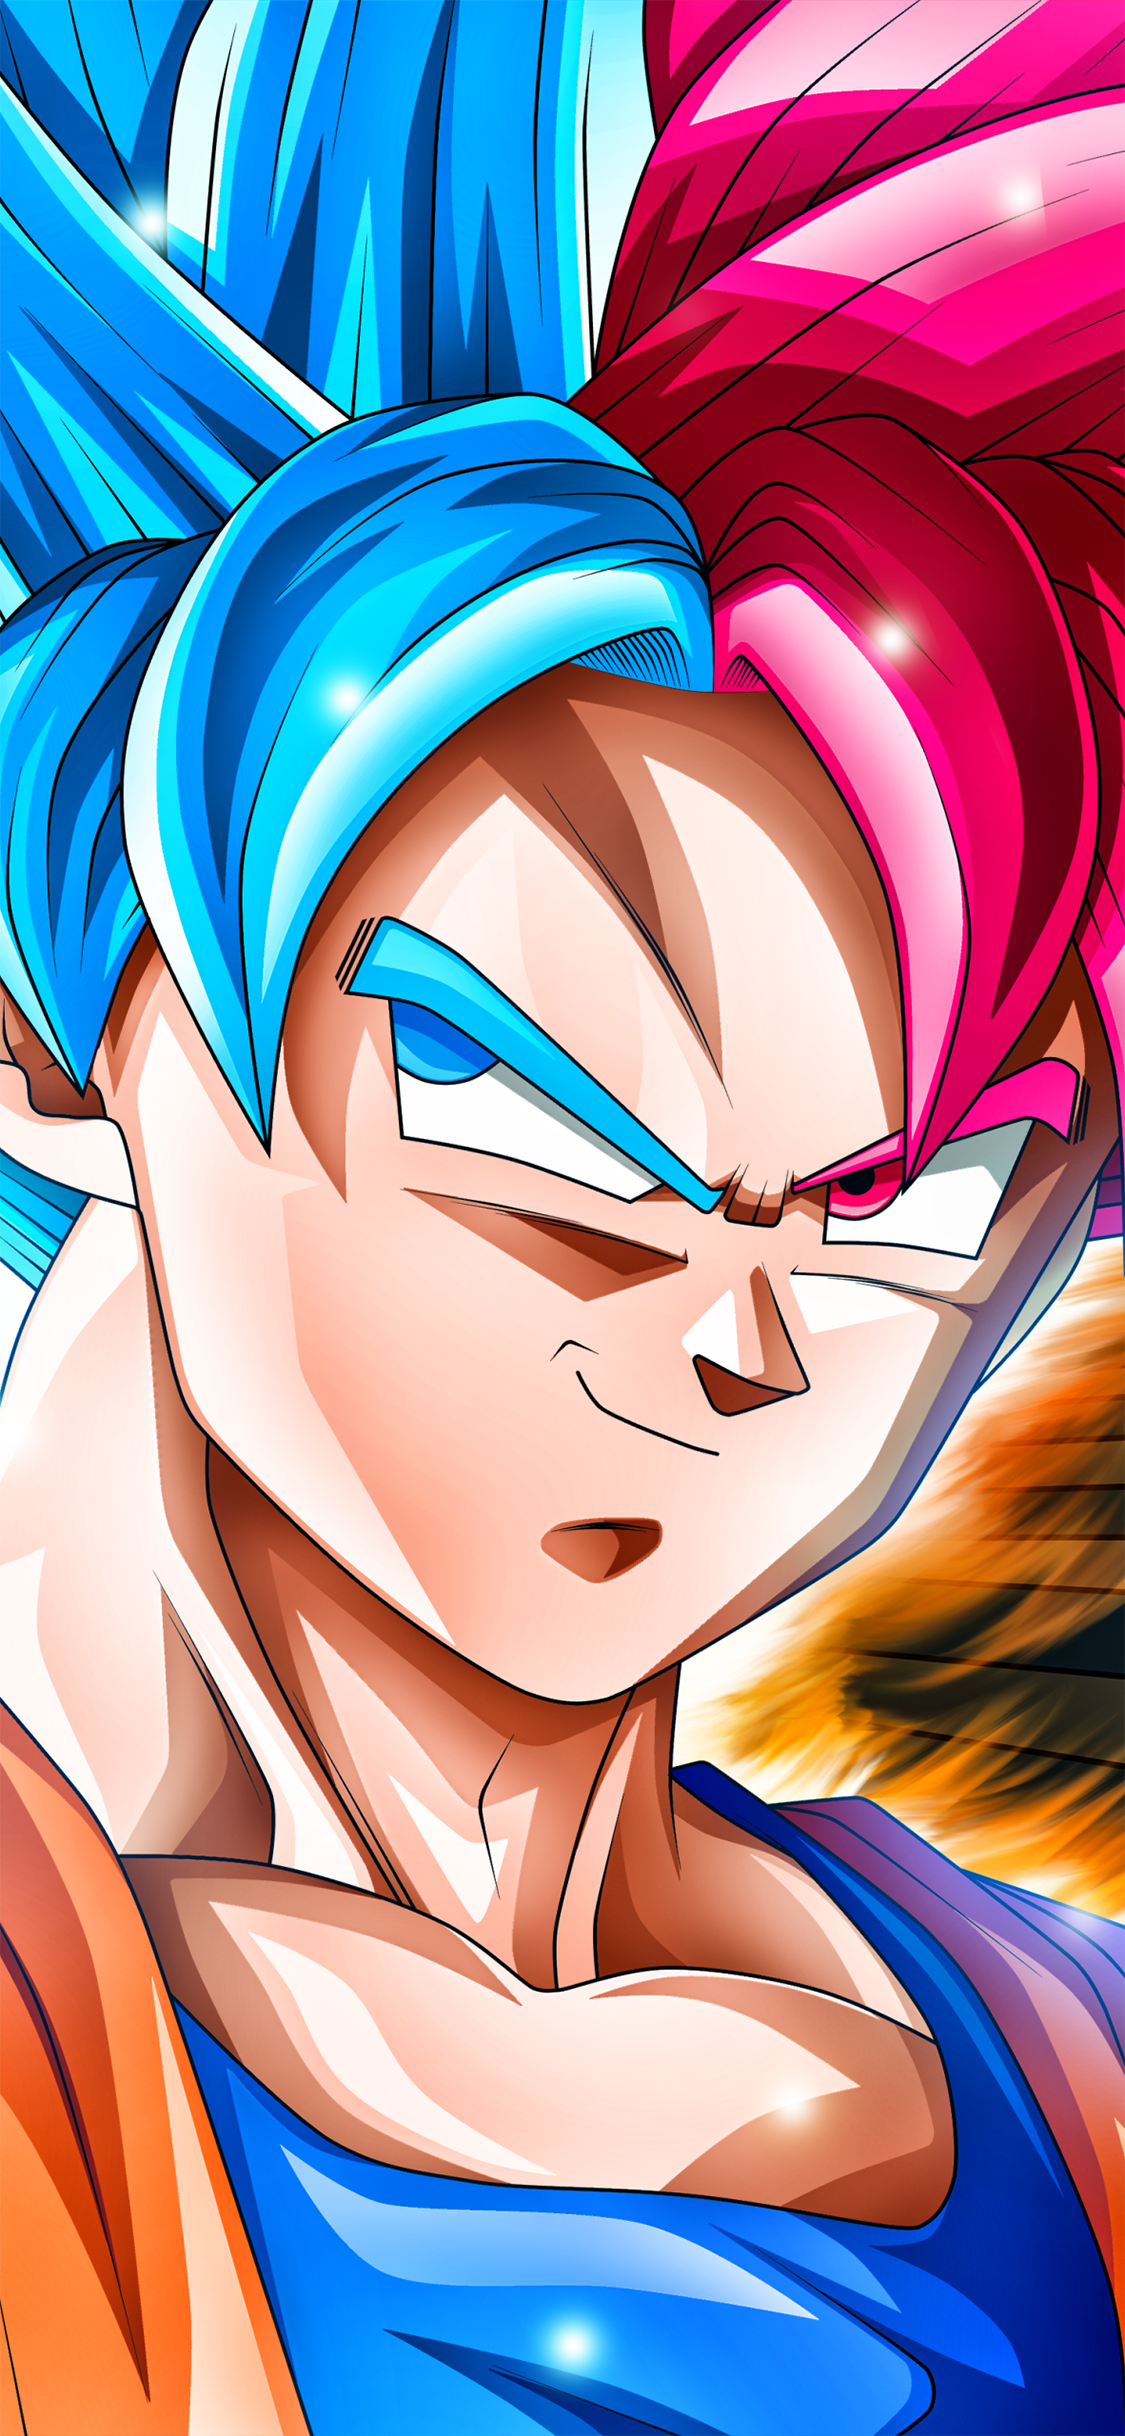 Dragon bead animation realizes empty colour Wallpaper for iPhone X, iPhone XS and iPhon. Anime dragon ball super, Dragon ball wallpaper iphone, Anime dragon ball